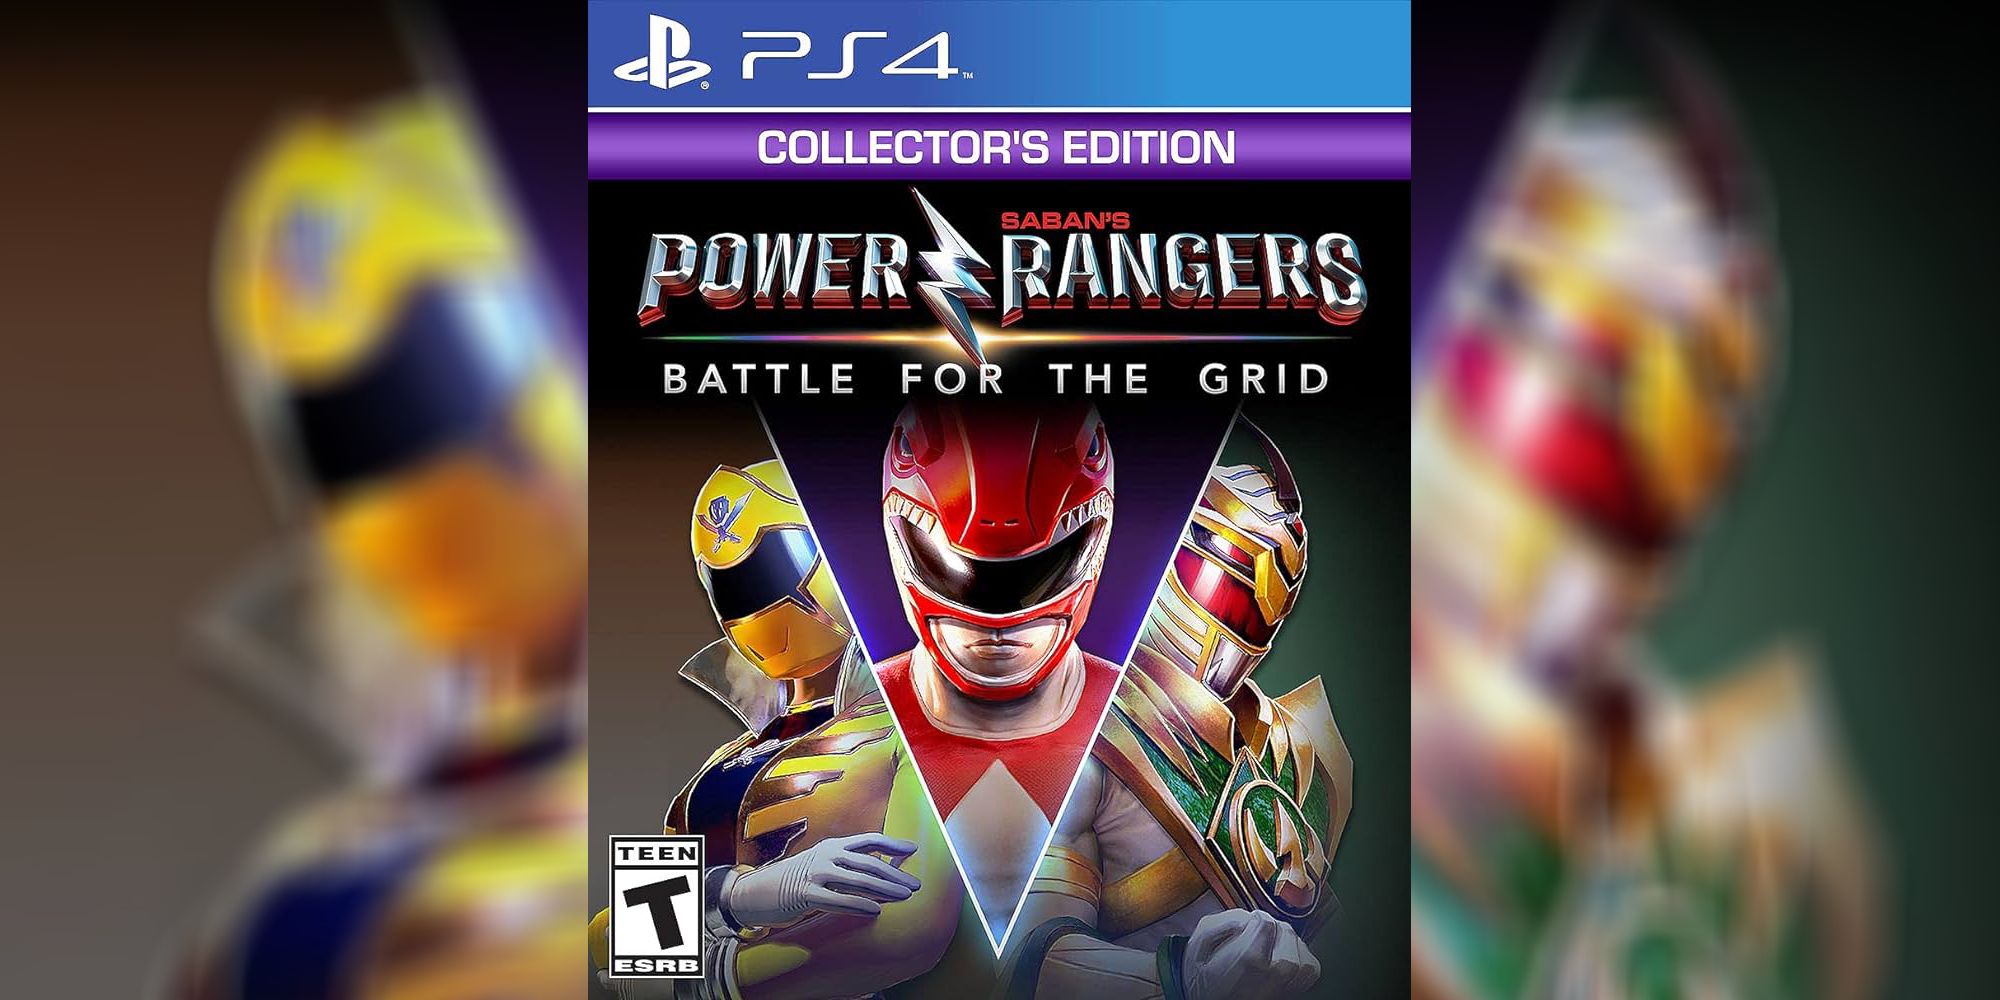 The cover art for Power Rangers Battle For The Grid Collector's Edition for PlayStation 4 featuring three Power Rangers